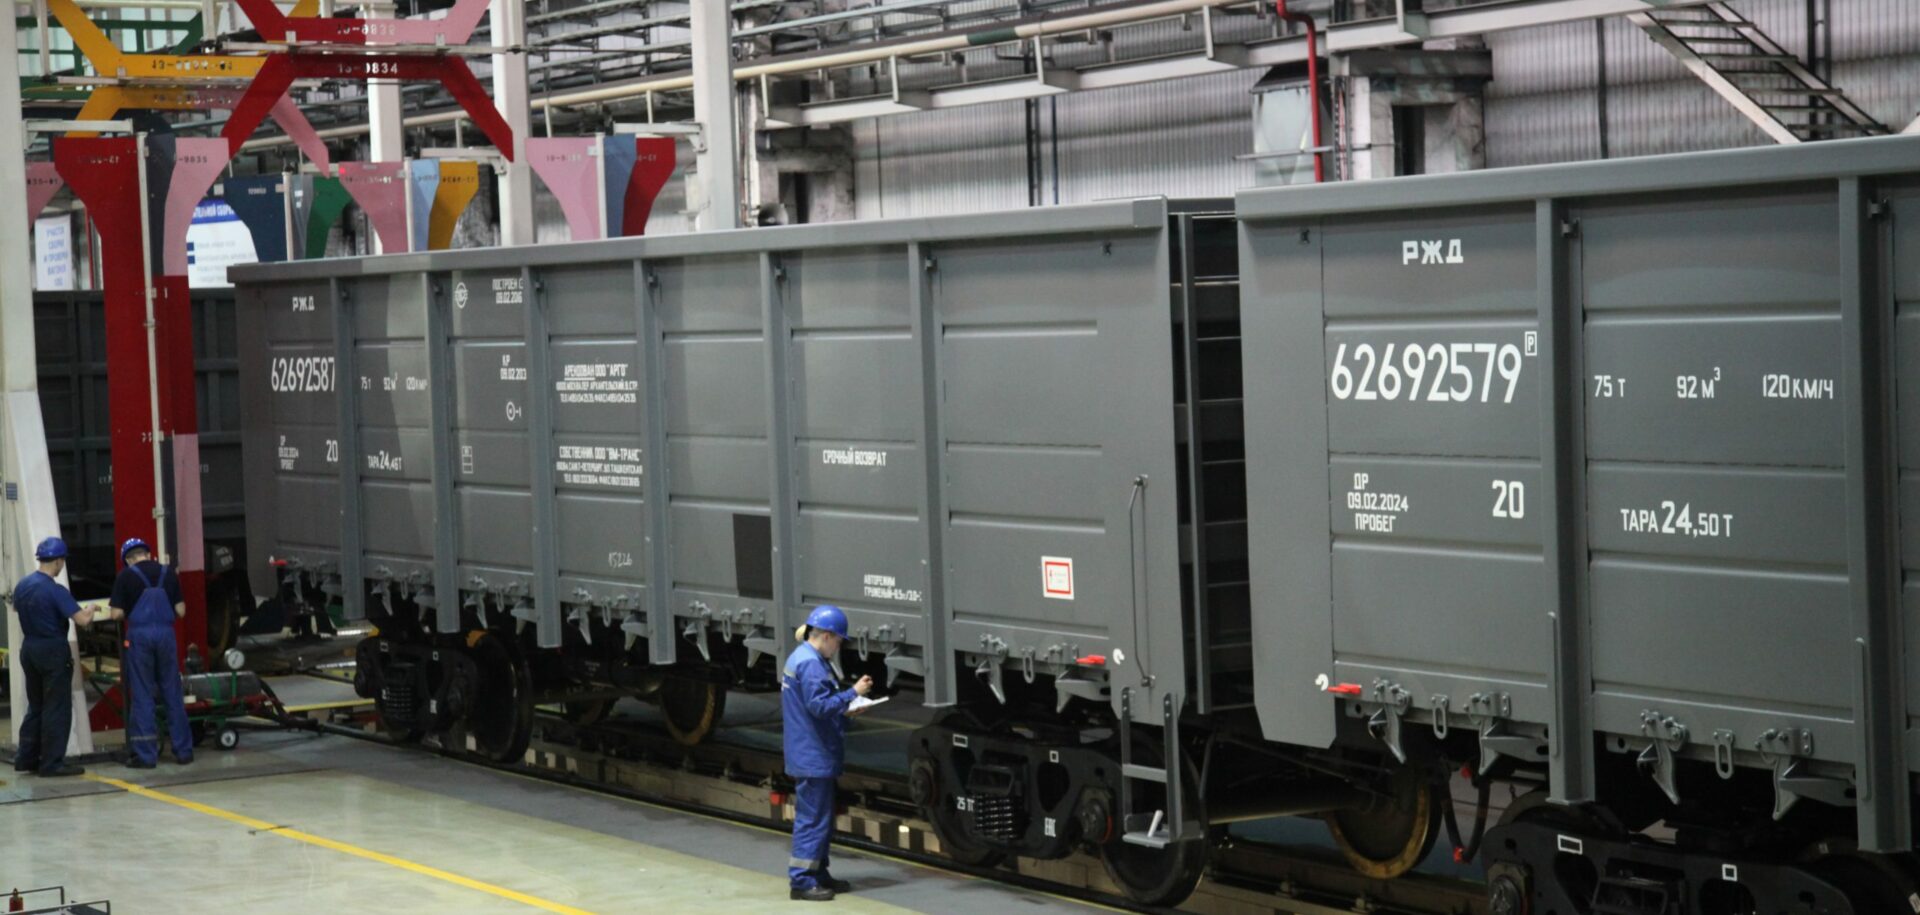 Contract extension with Russian rail company